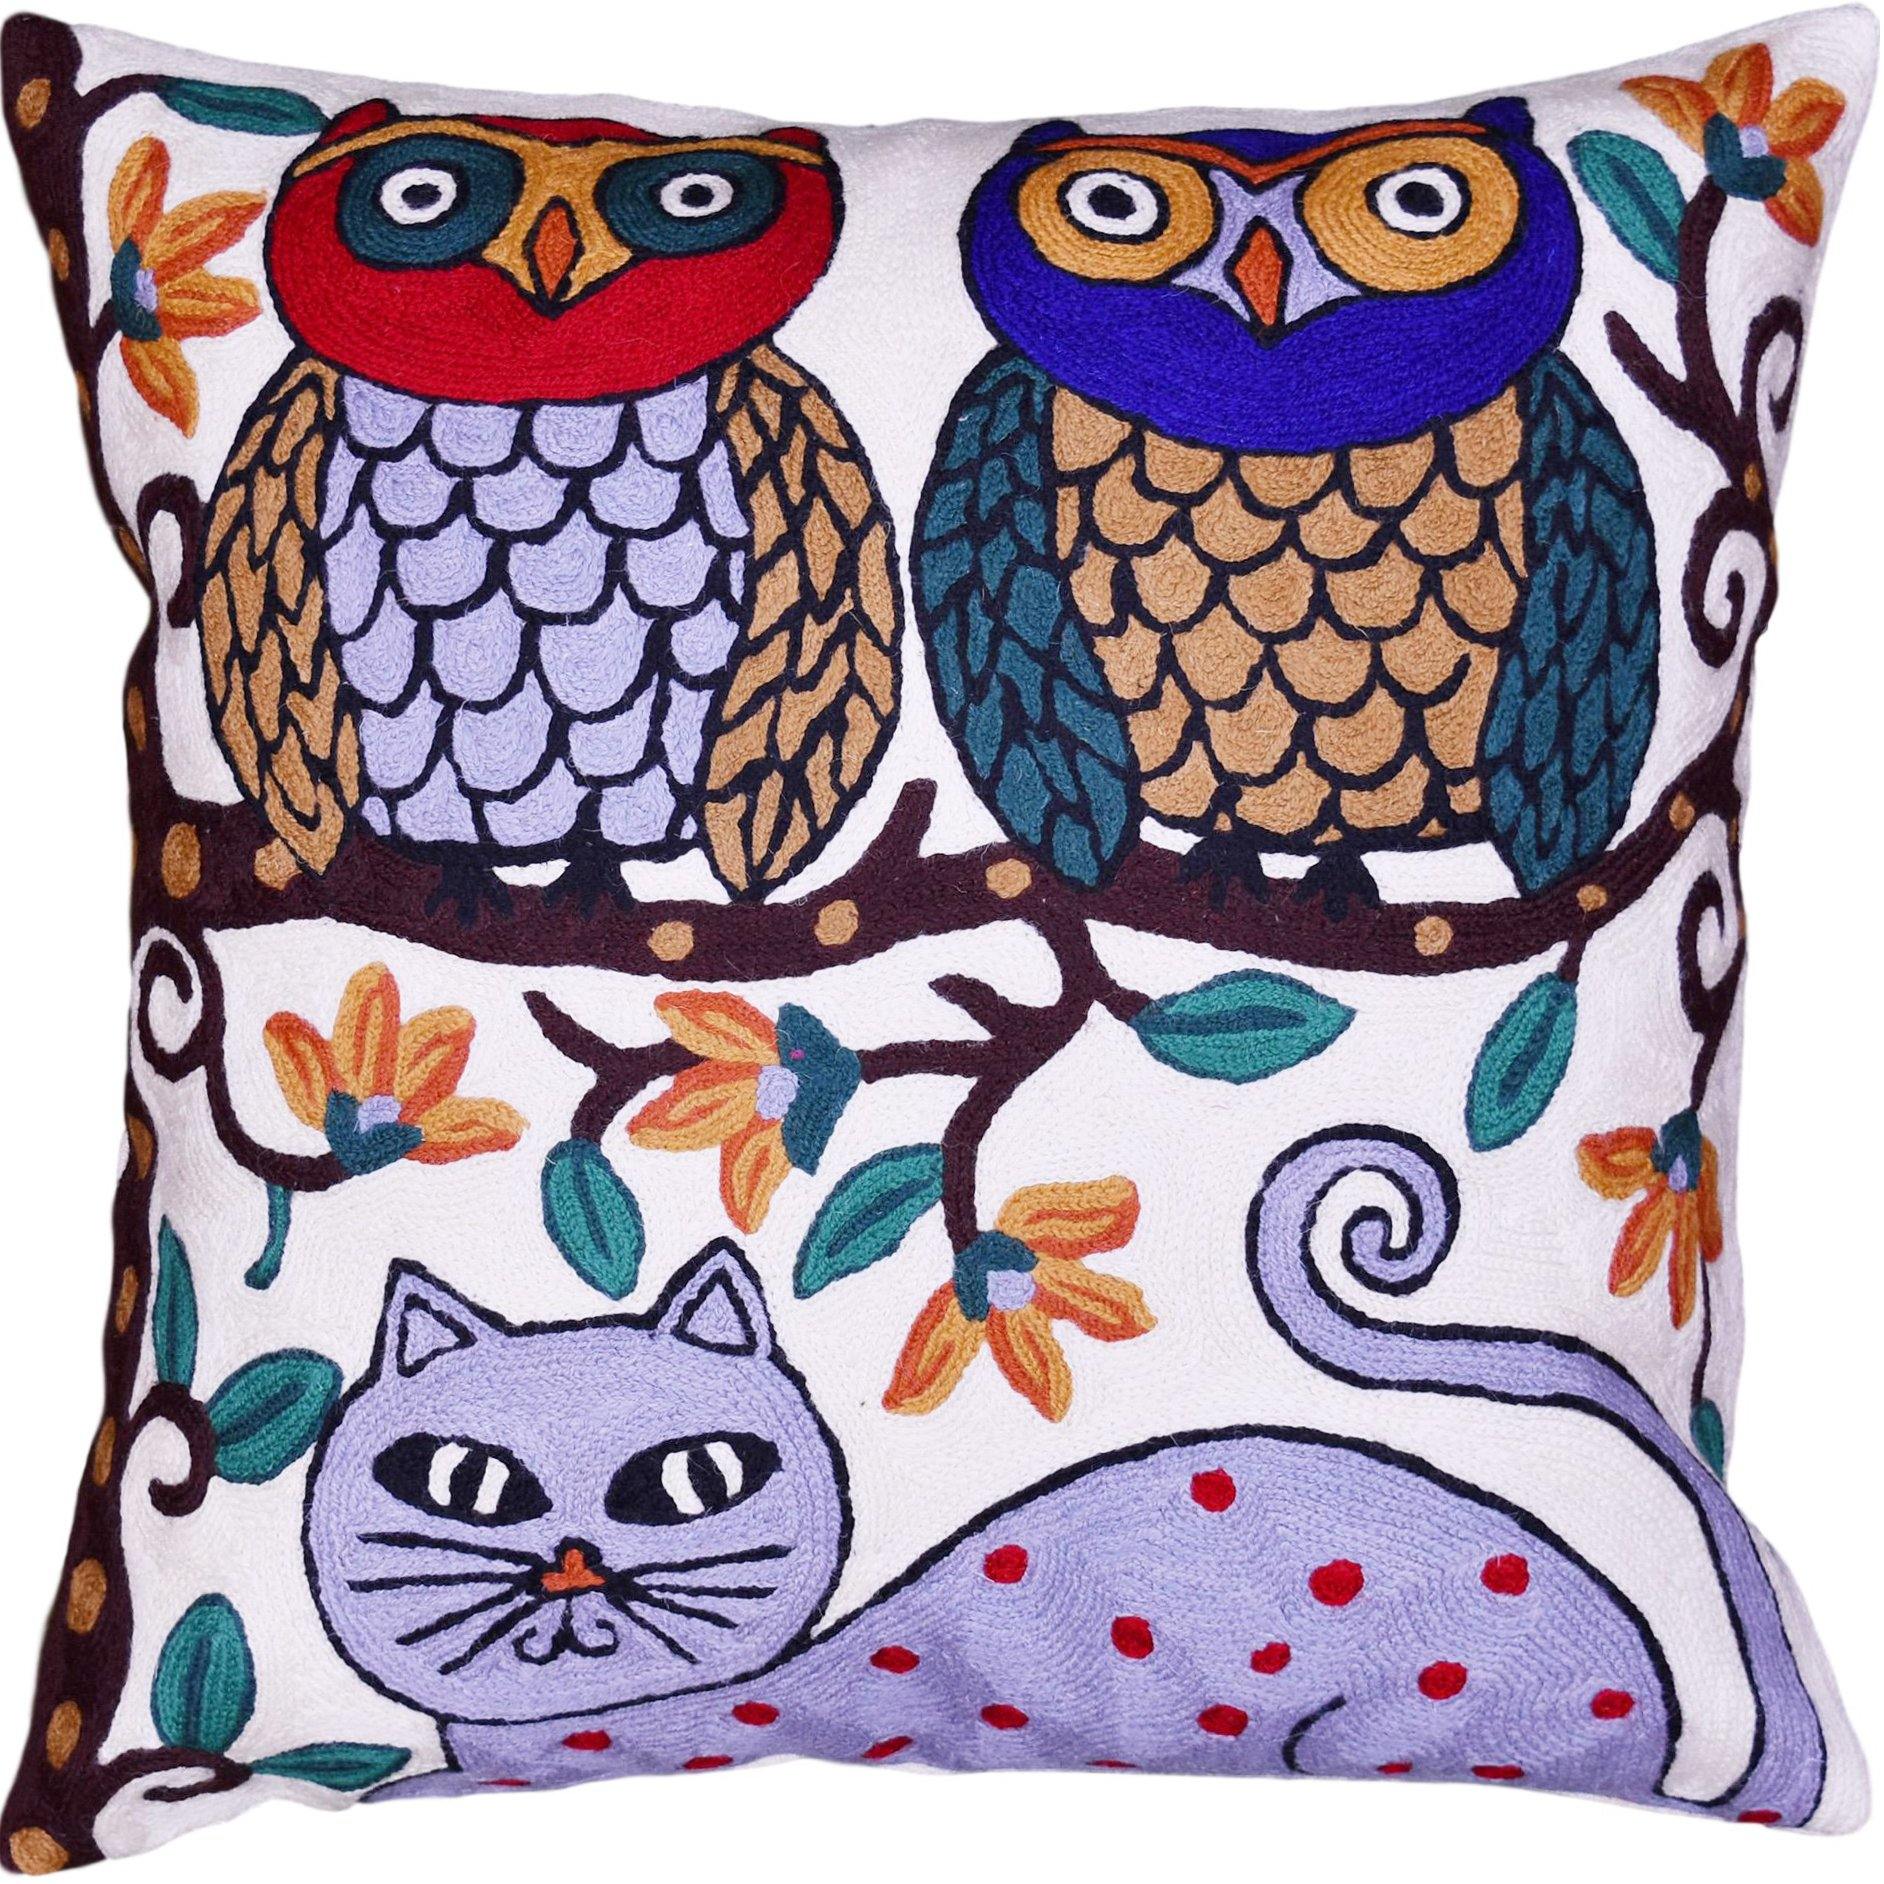 Two Owls on Tree Cat Decorative Pillow Cover Whimsical Handembroidered –  Kashmir Designs